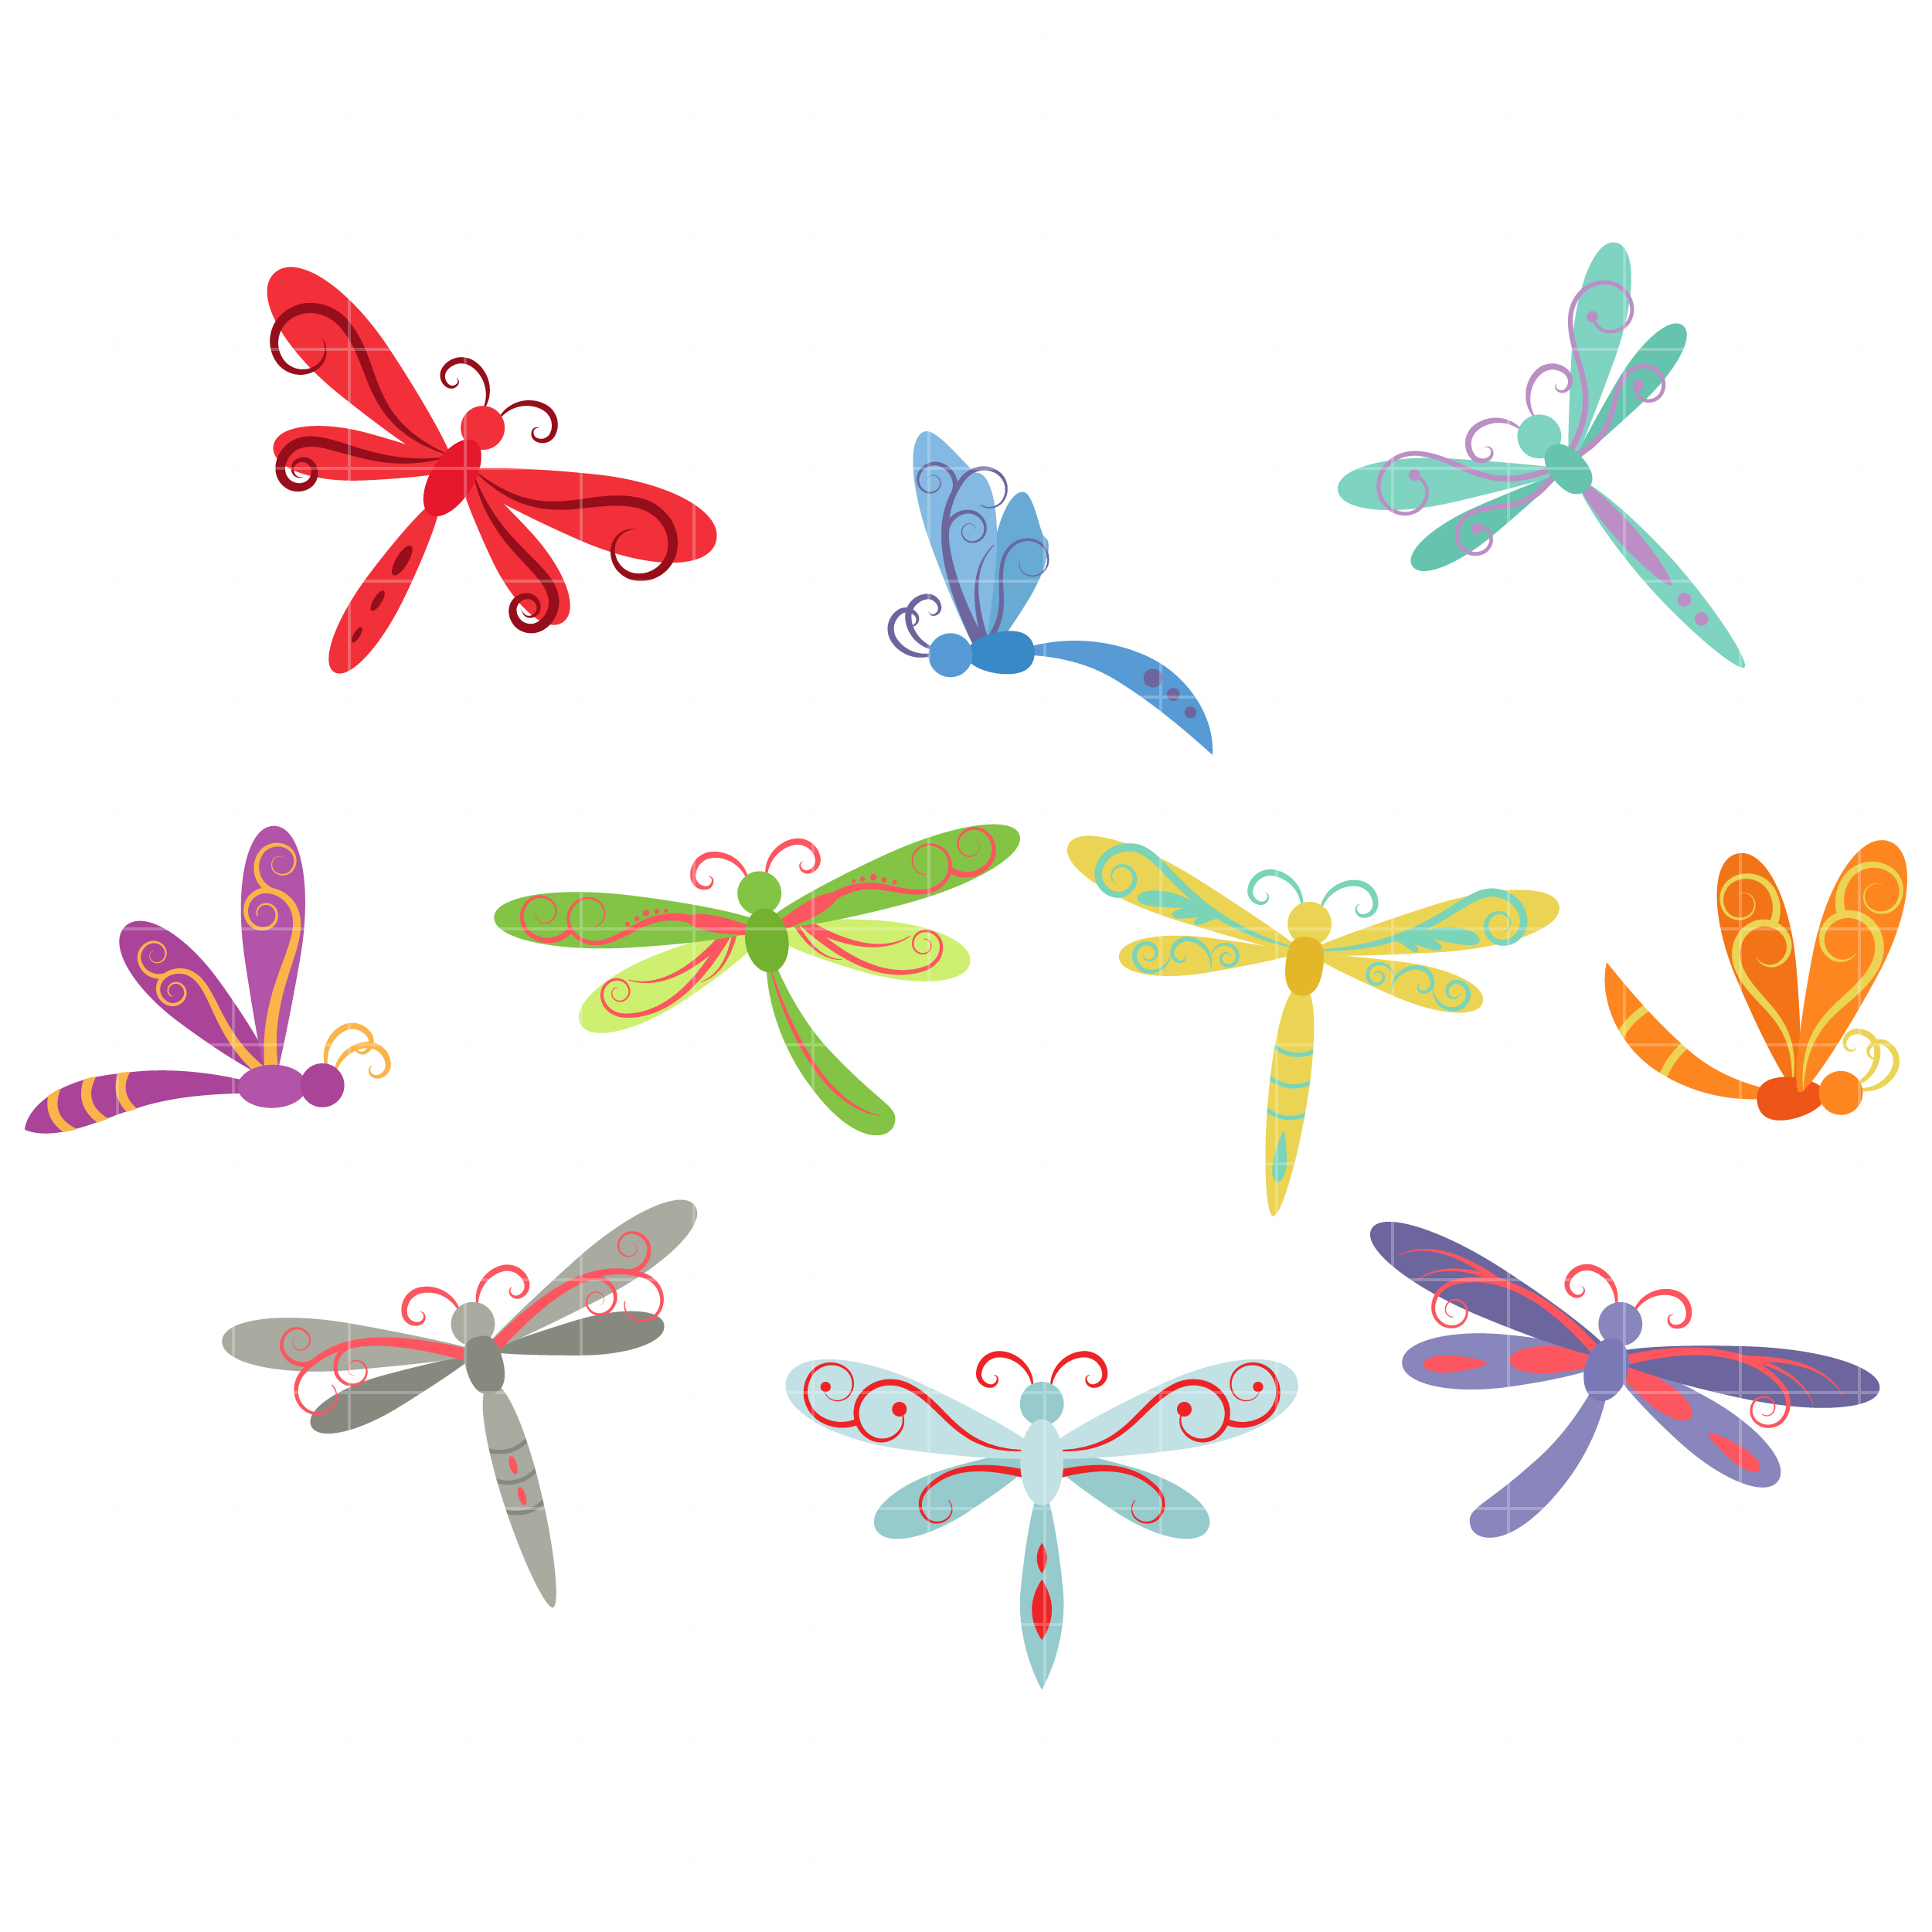 Dragonfly whimsical dragonflies set semi exclusive clip art set for